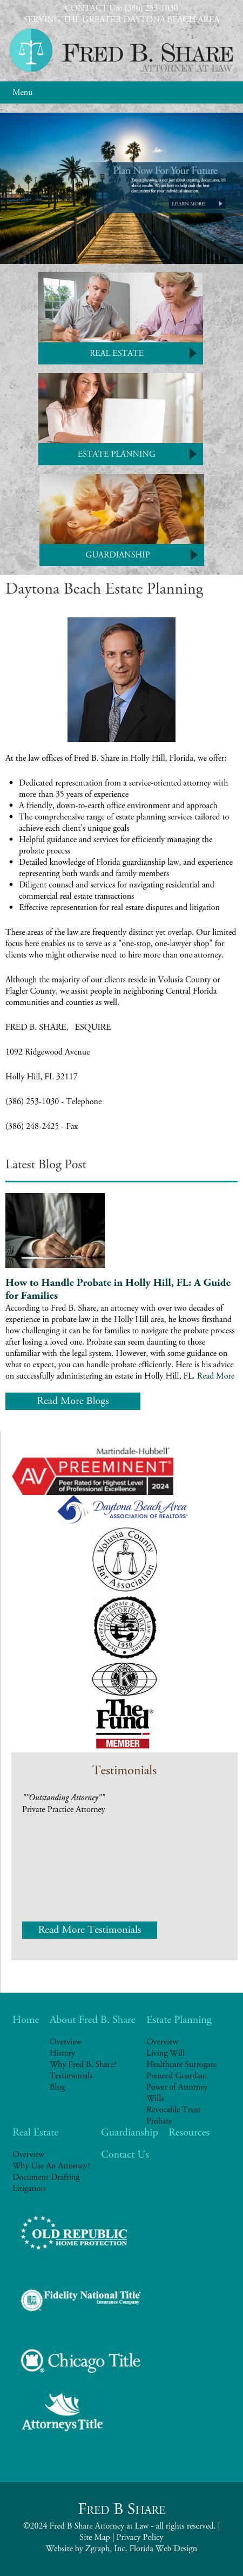 Fred B. Share - Holly Hill FL Lawyers